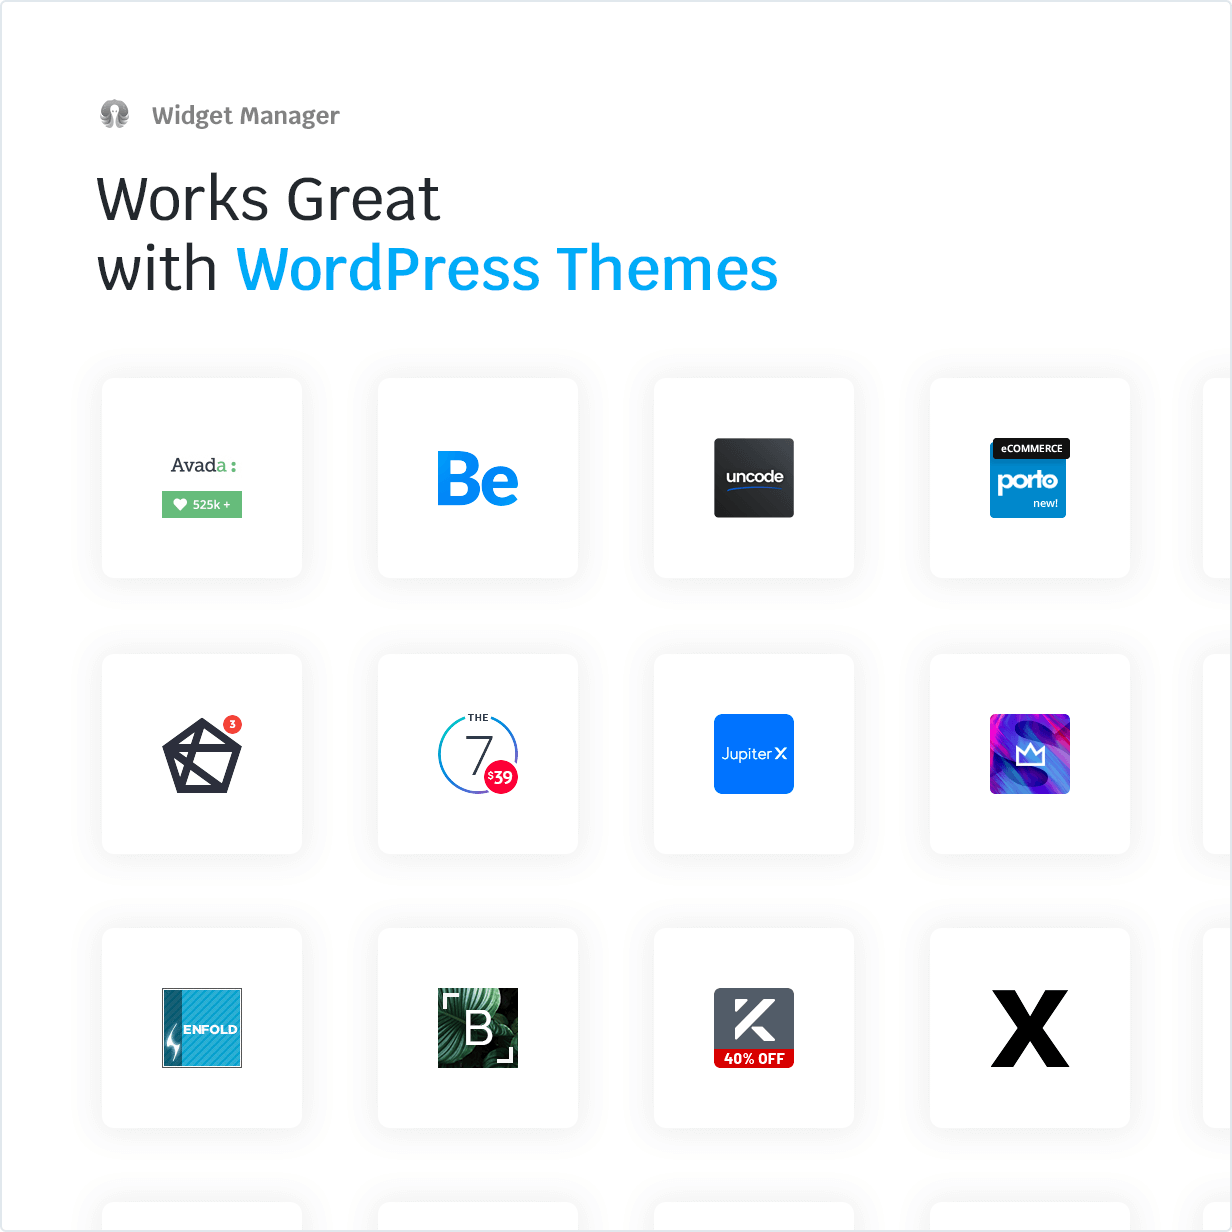 Works Great with WordPress Themes